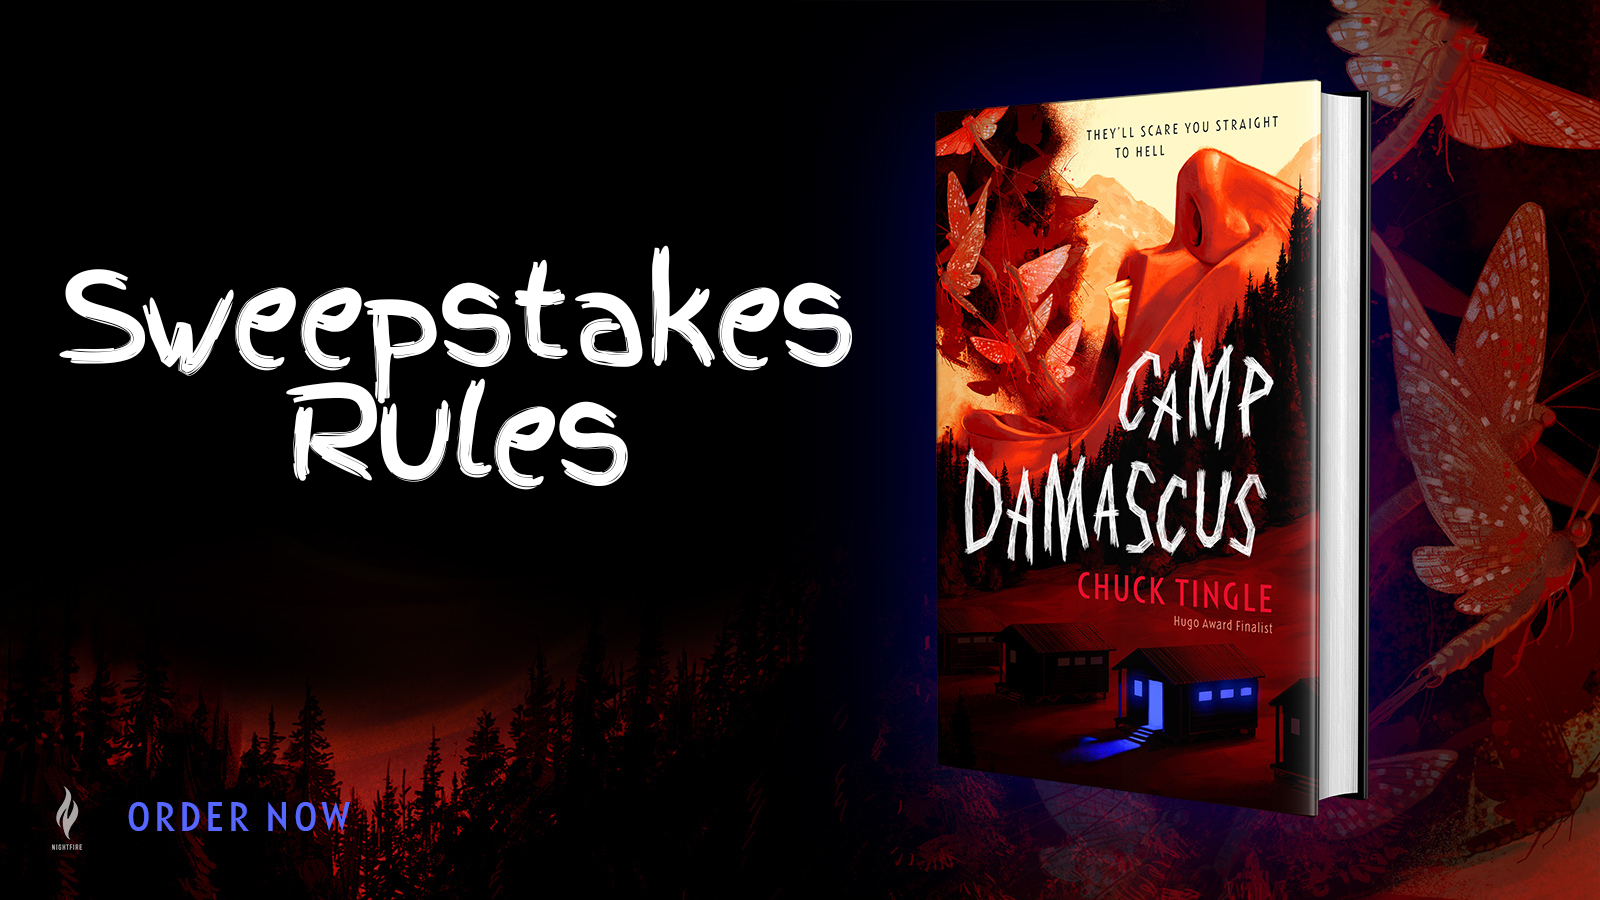 Camp Damascus Sweepstakes Rules - 13